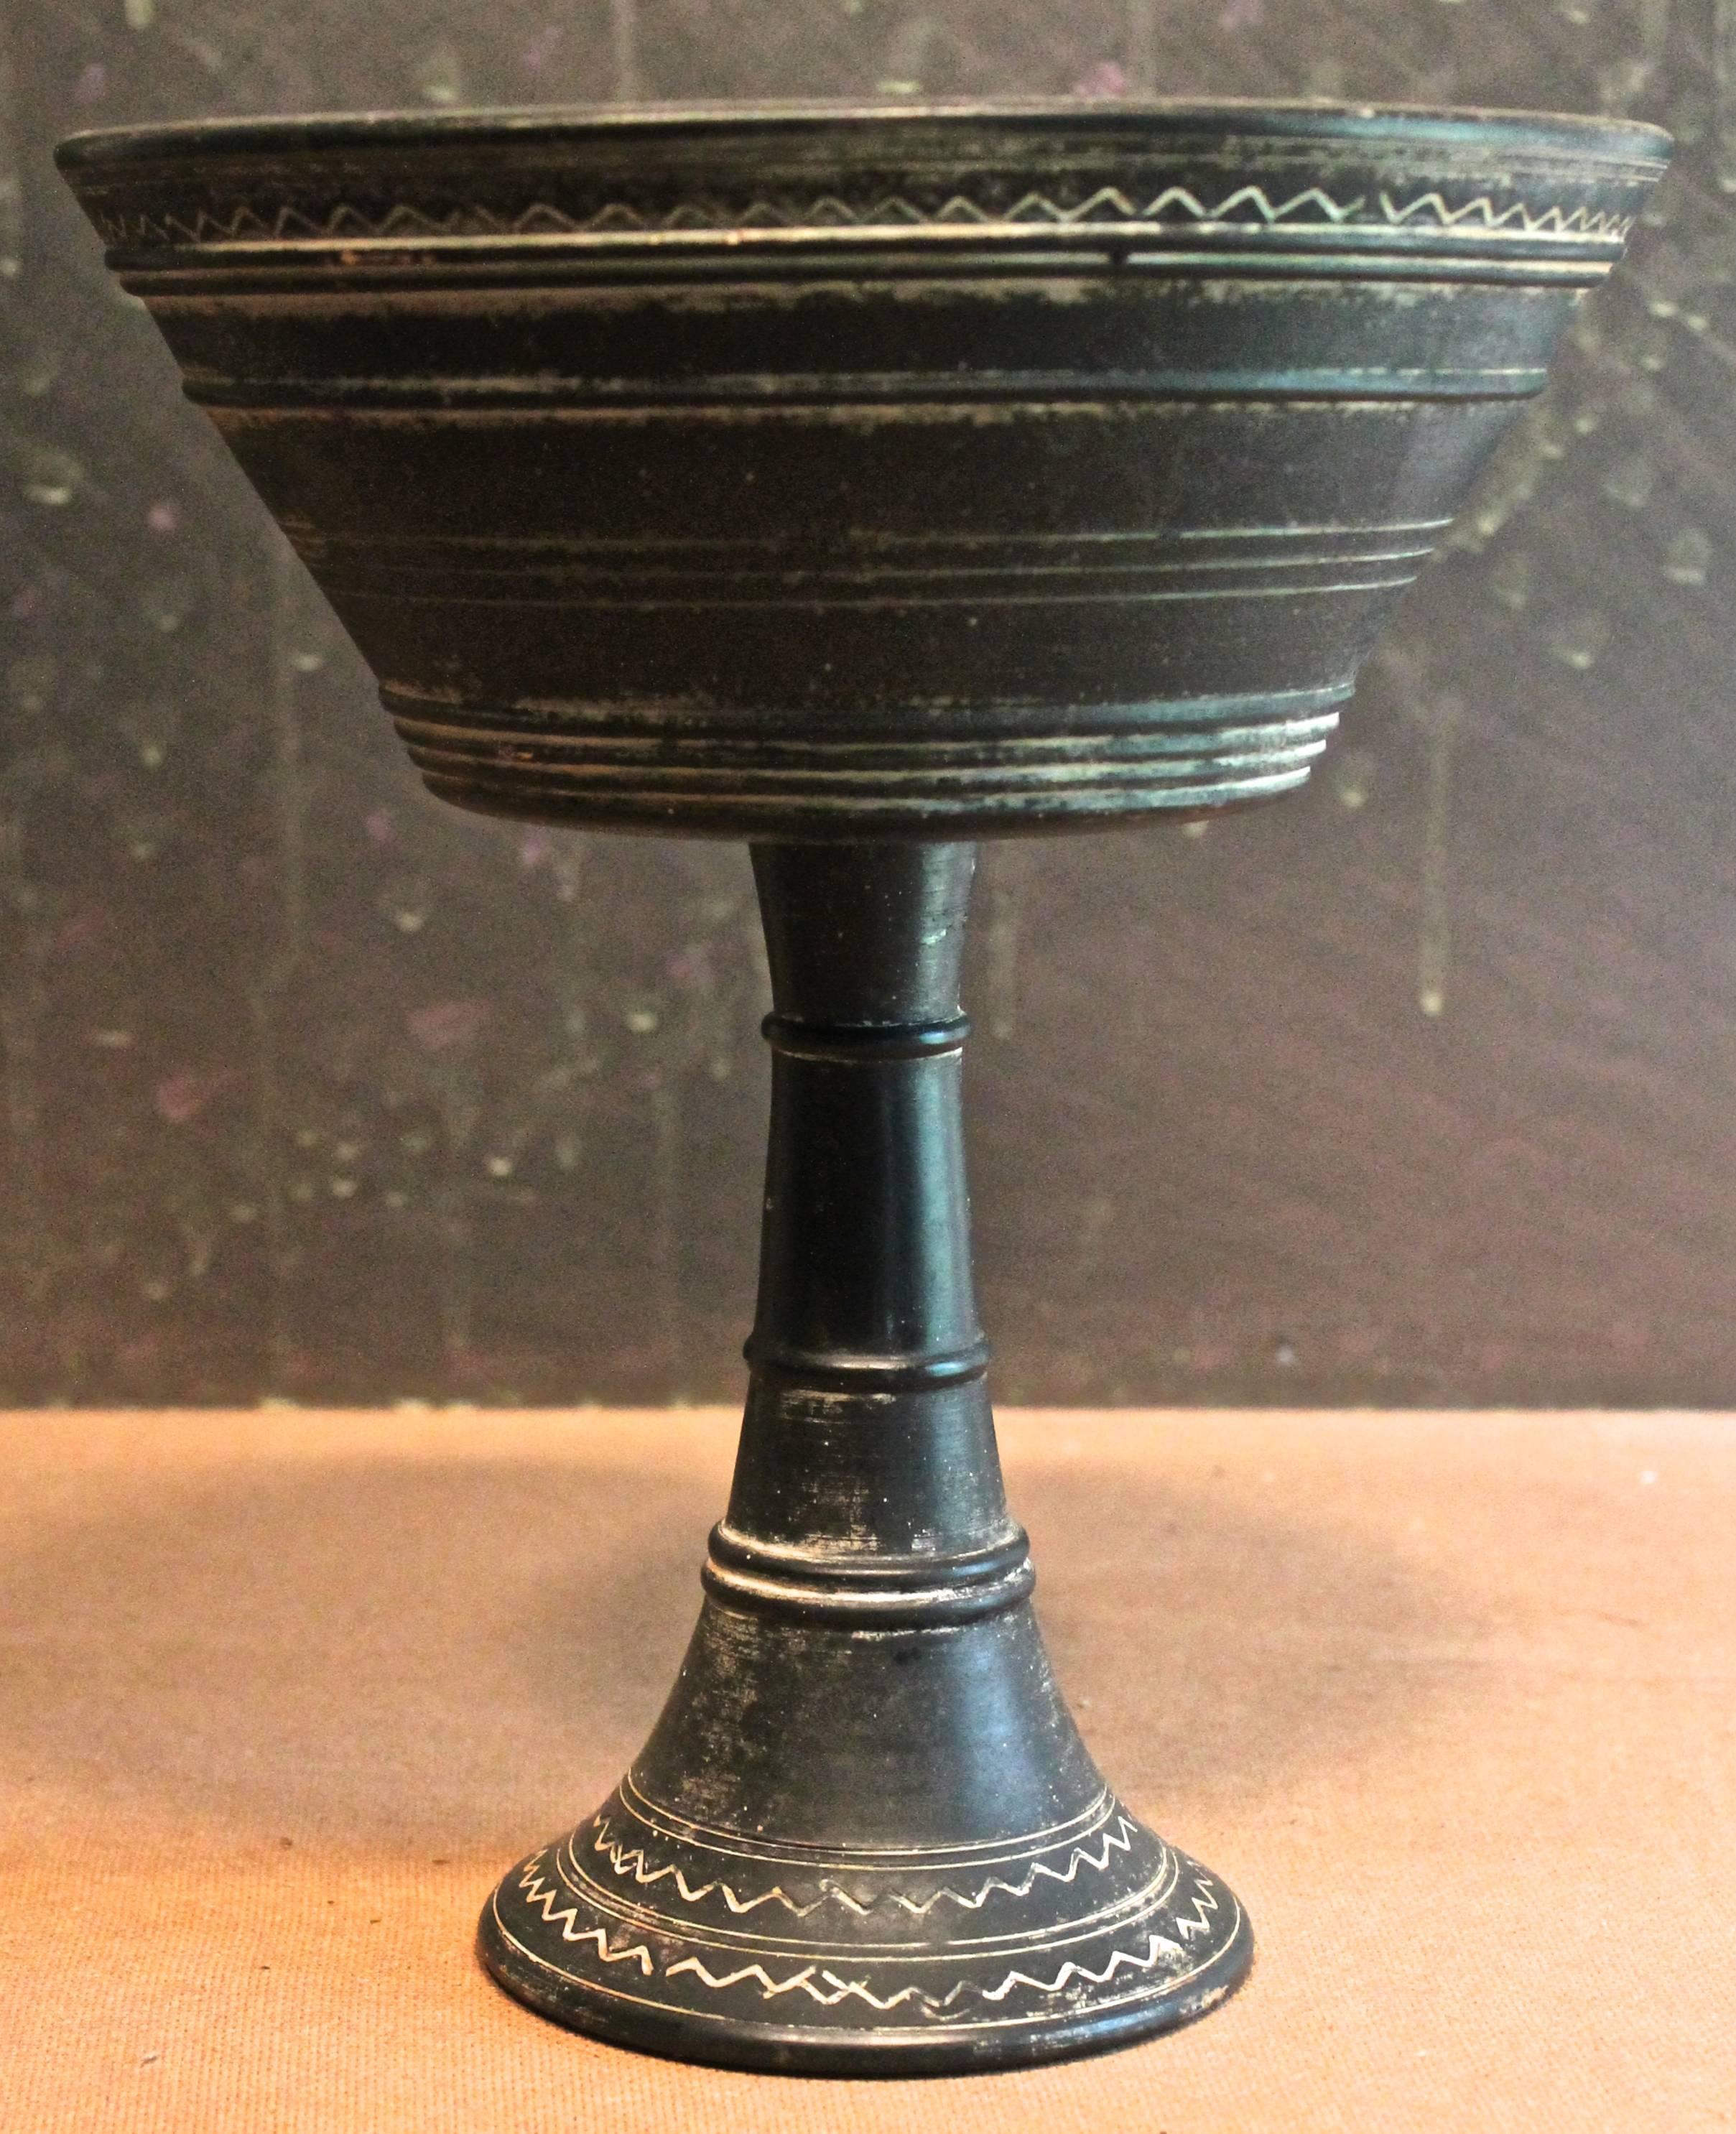 A Zaccagnini ceramic reproduction of the museum's Etruscan compote. Fully signed on bottom.